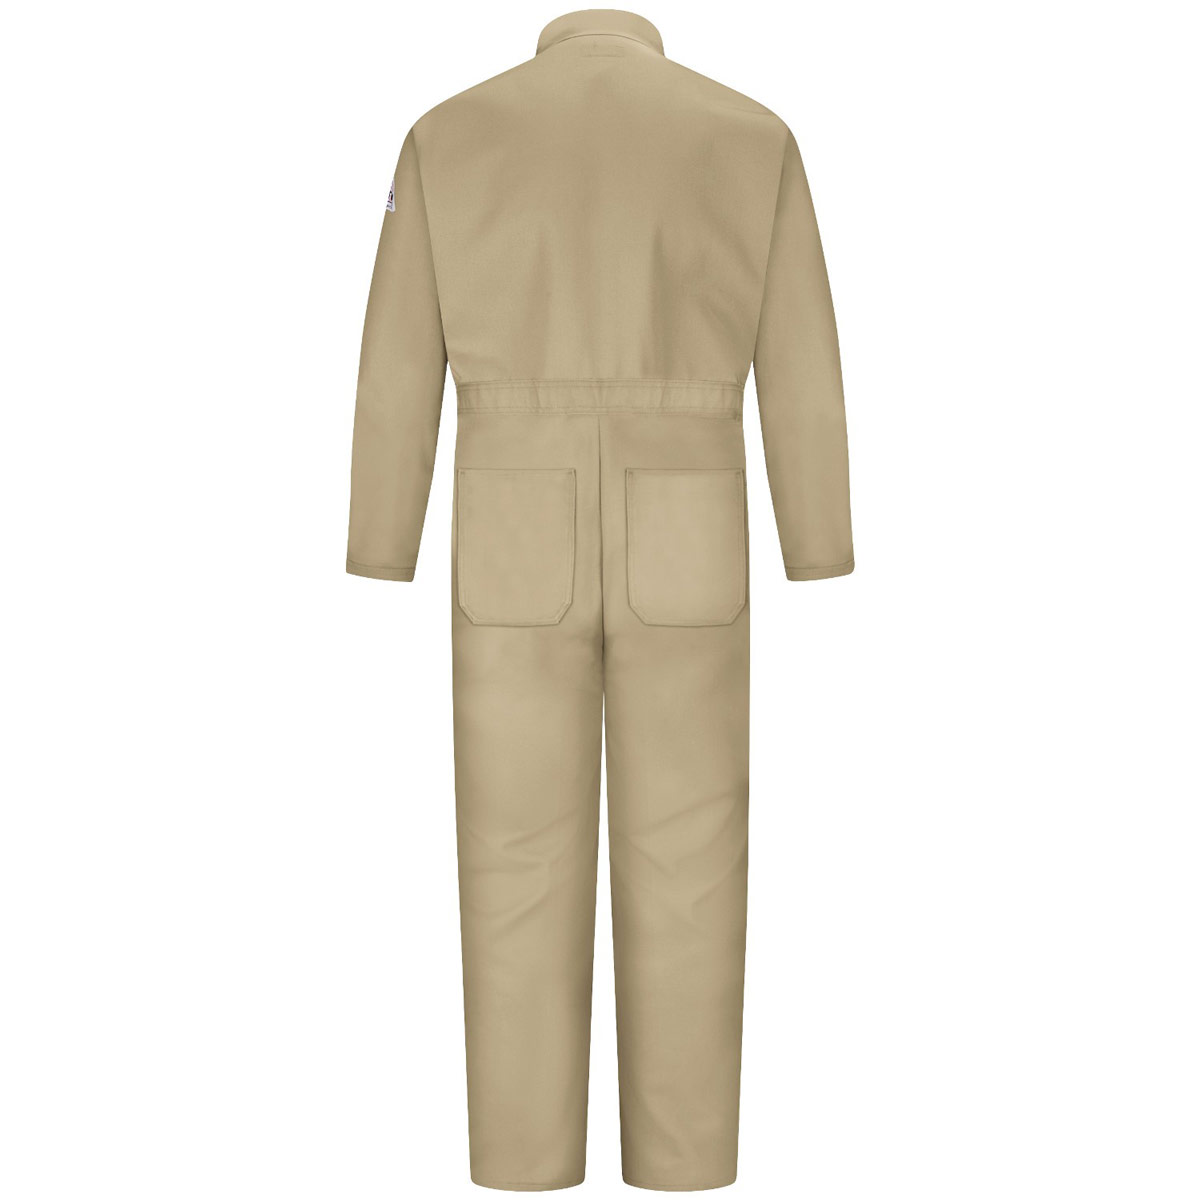 Bulwark 52'' Khaki Cotton Flame Resistant Coverall With Zipper Closure - image 2 of 2